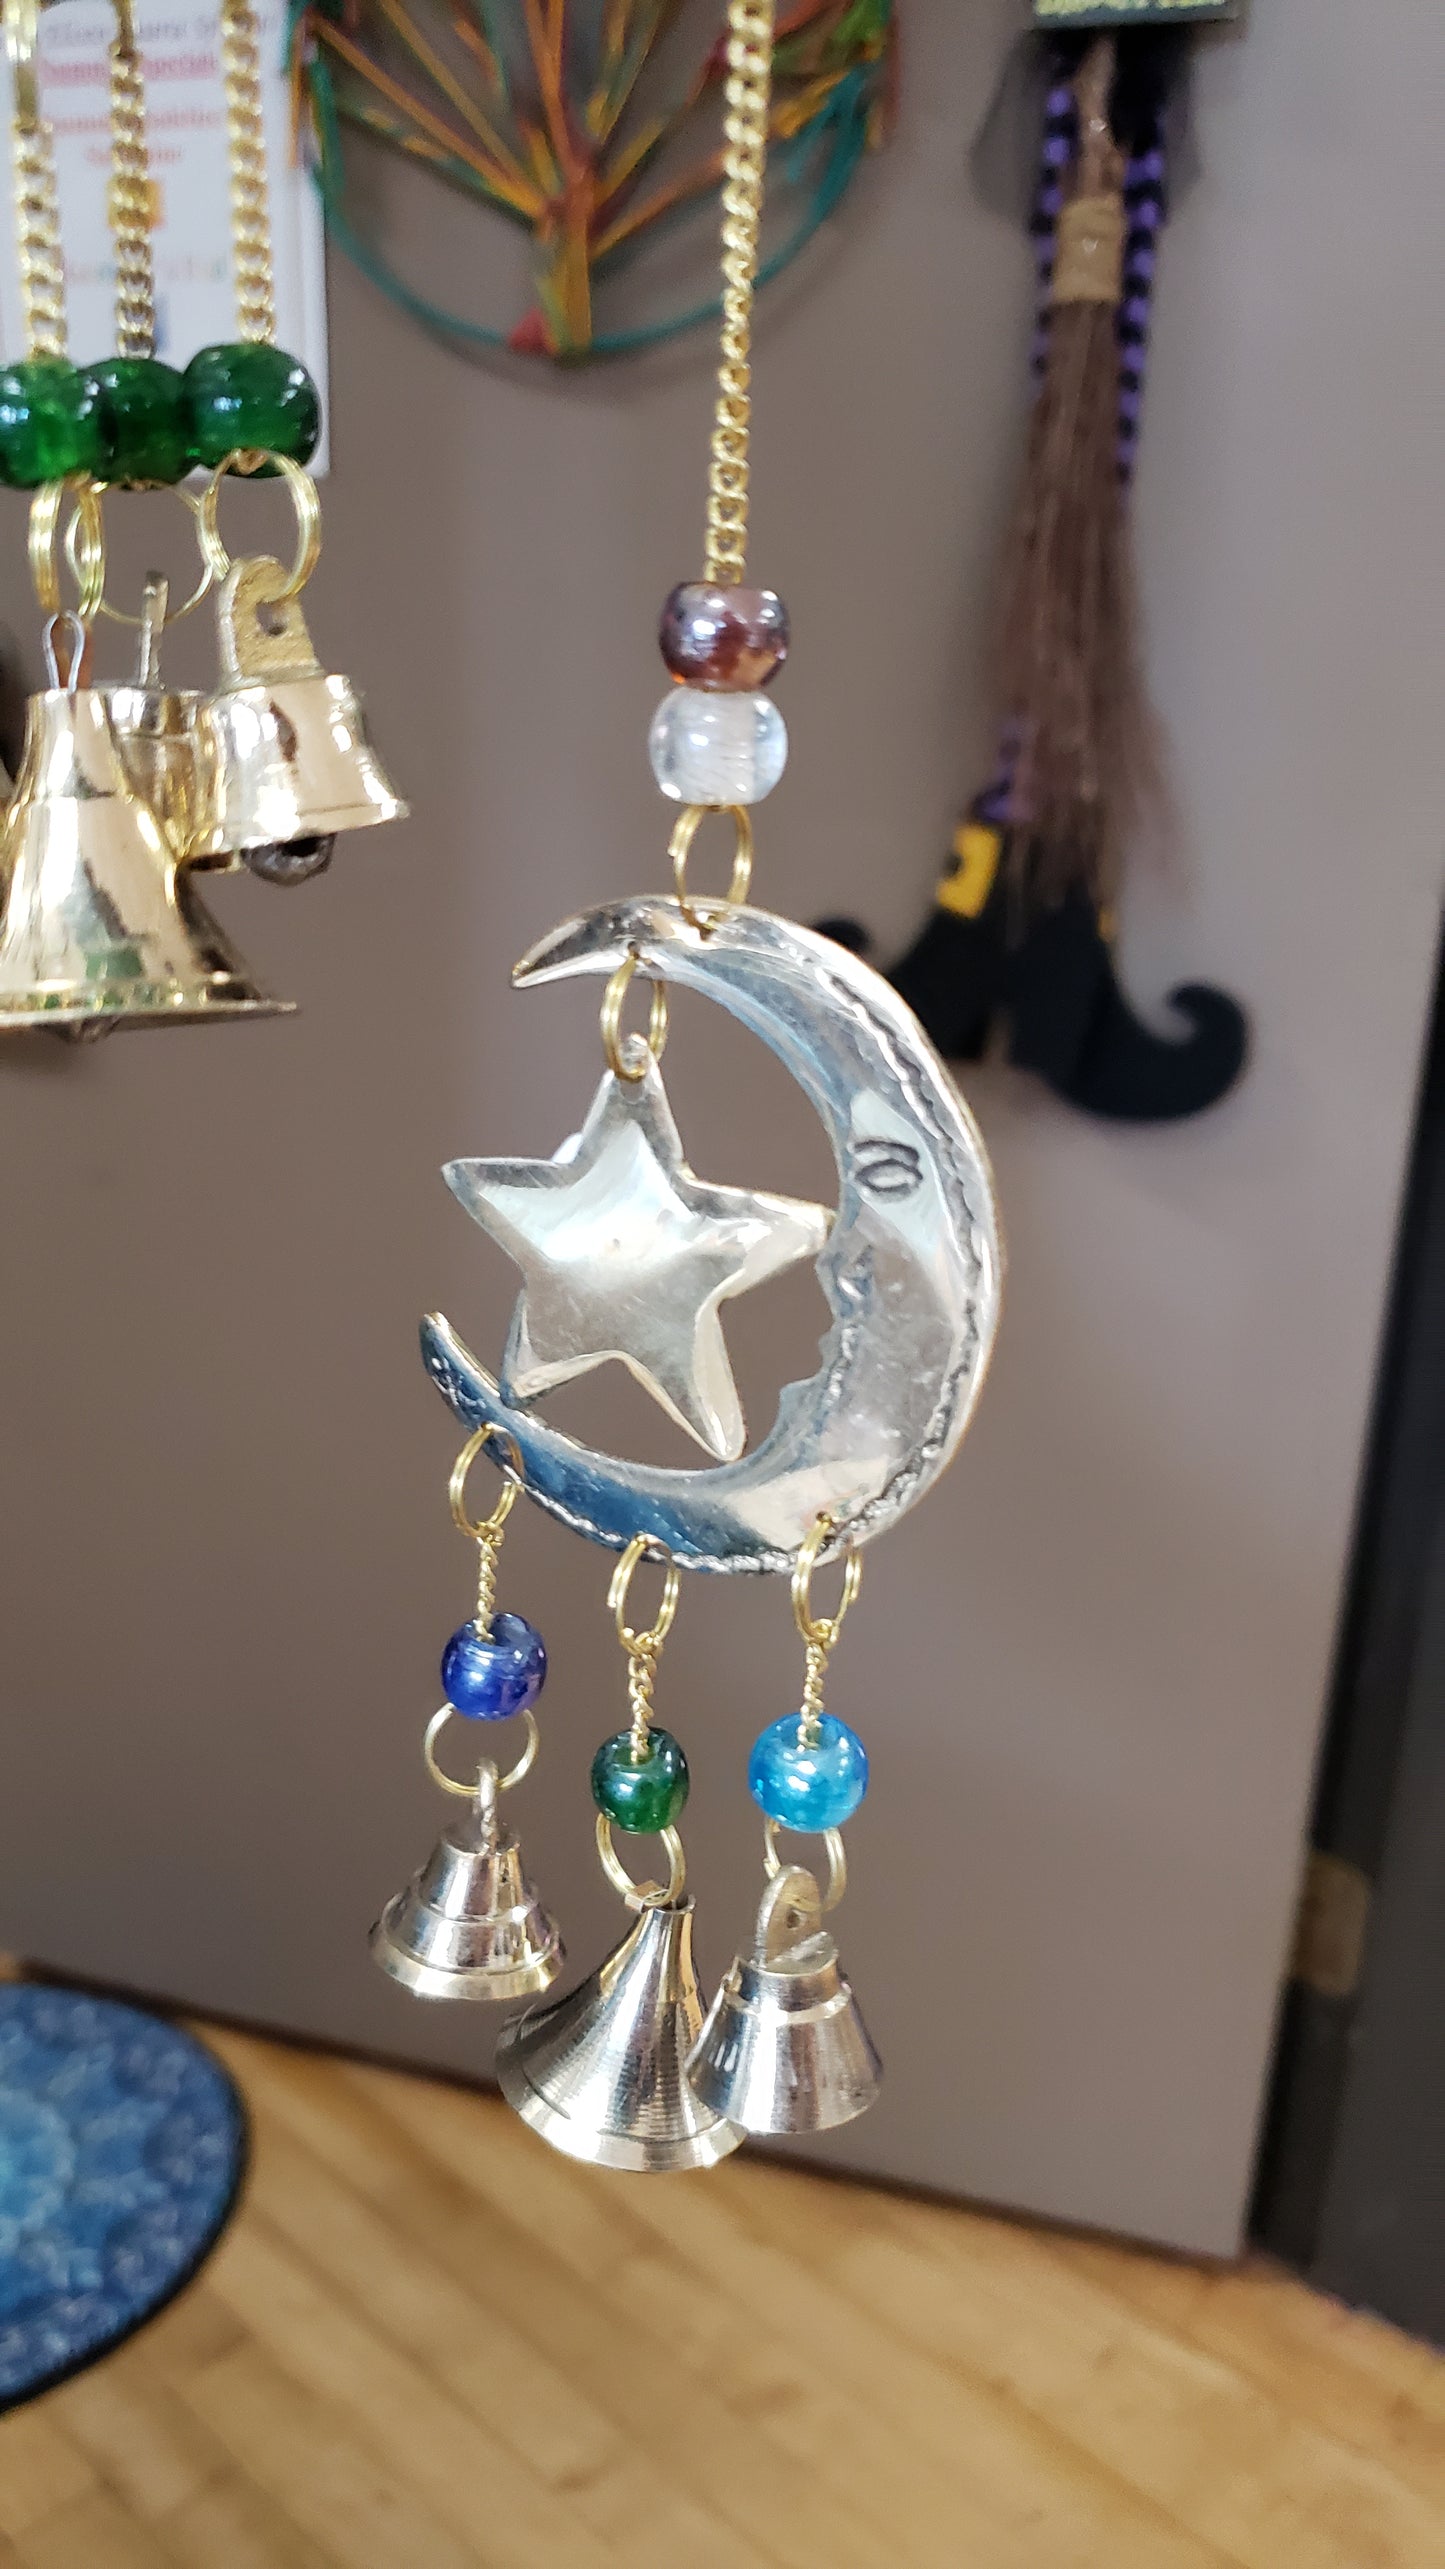 Three Bell Star and Moon Wind Chime 9 inch - Tree Of Life Shoppe